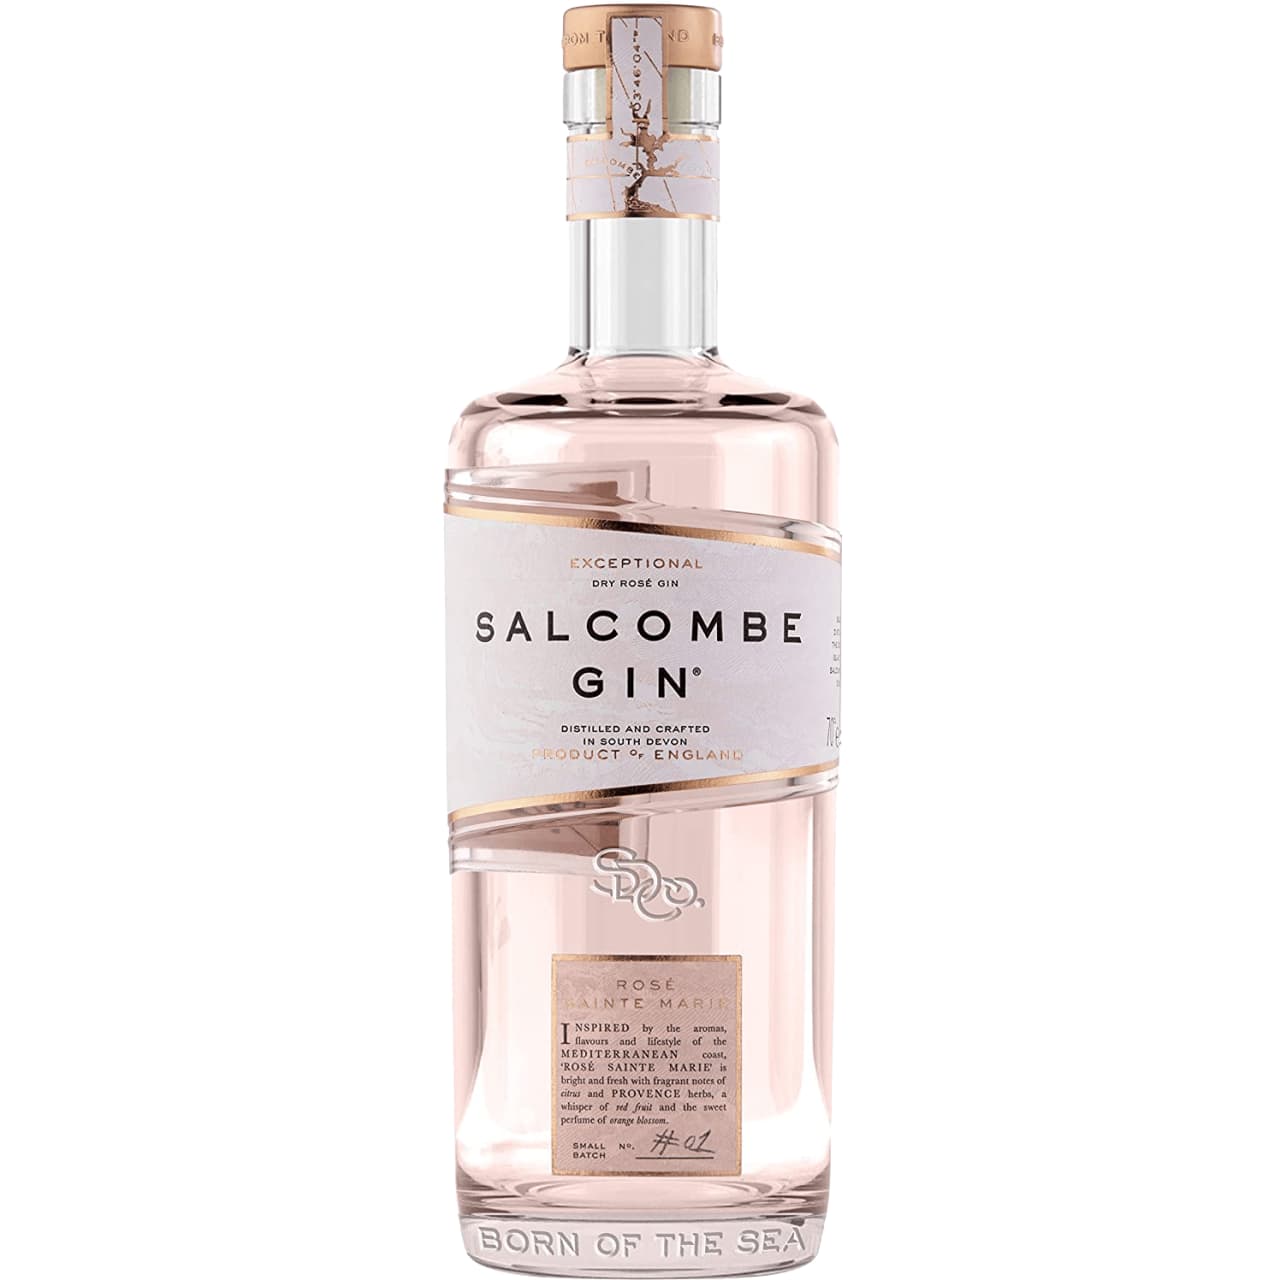 Salcombe Gin ‘Rosé Sainte Marie’ is bright, fresh and delicate with aromas or freshly peeled lemons and a whisper of red fruit, followed by the subtle perfume of white flowers and orange blossom.